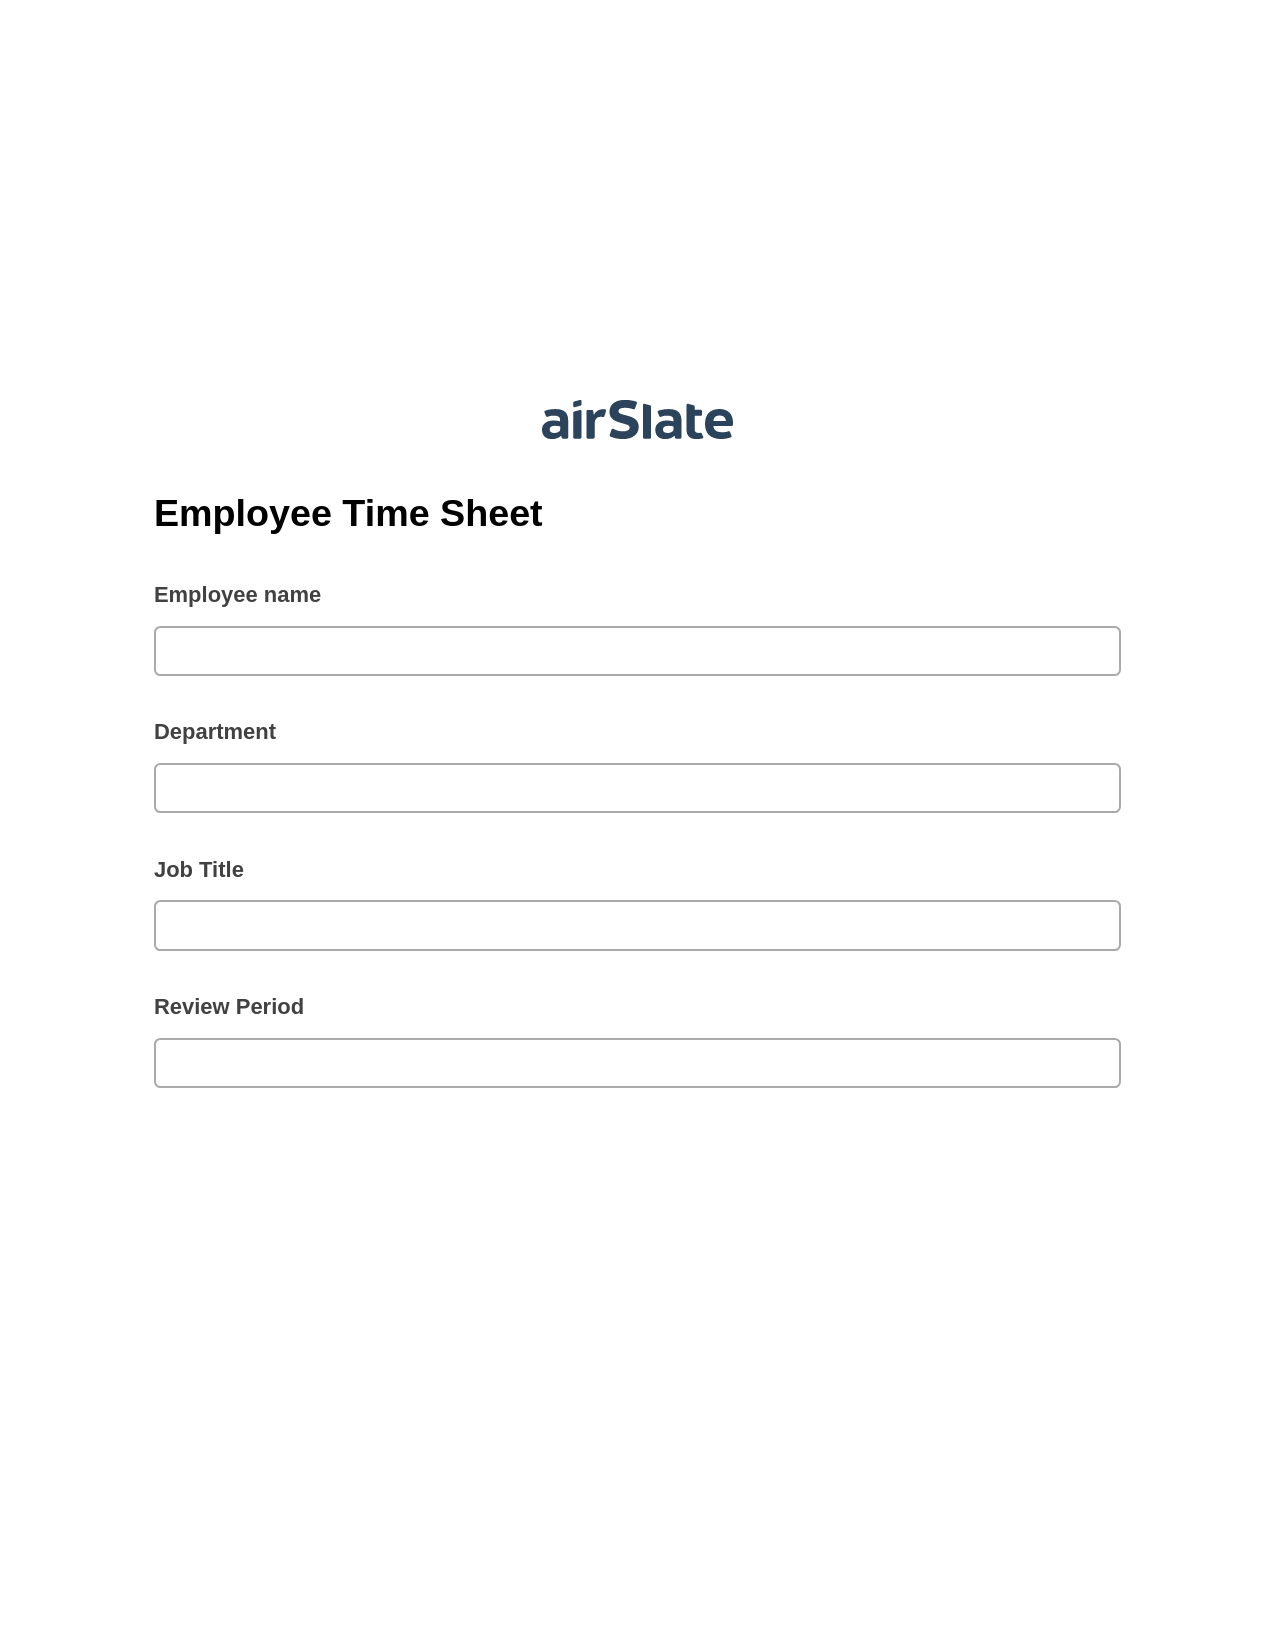 Employee Time Sheet Pre-fill from Google Sheets Bot, Update Audit Trail Bot, Archive to Dropbox Bot